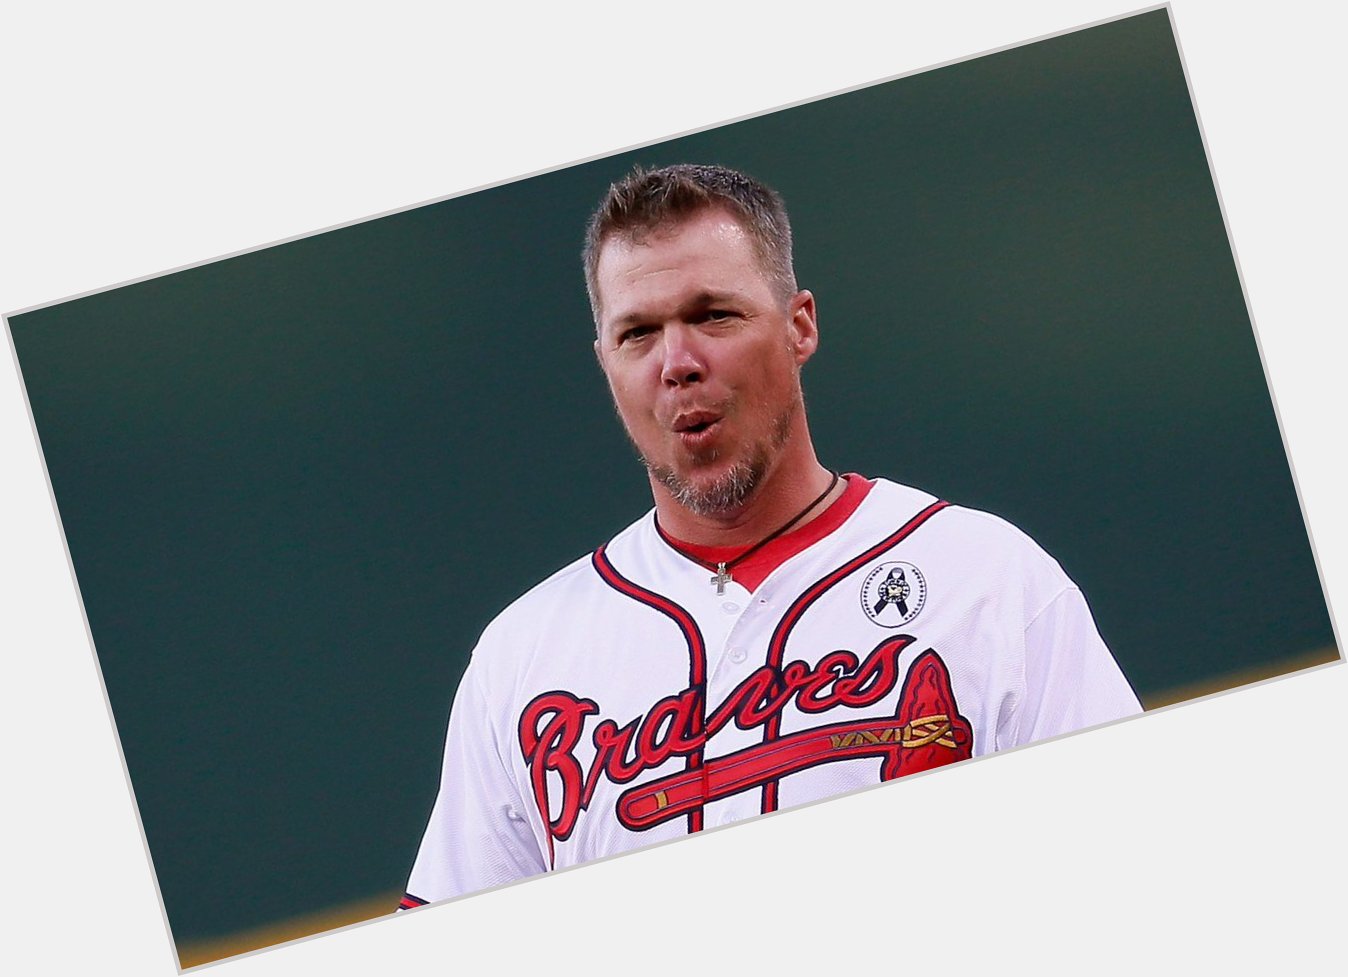 Happy Birthday to another one of my favorite players - Chipper Jones! 

One of the best third baseman of all time! 